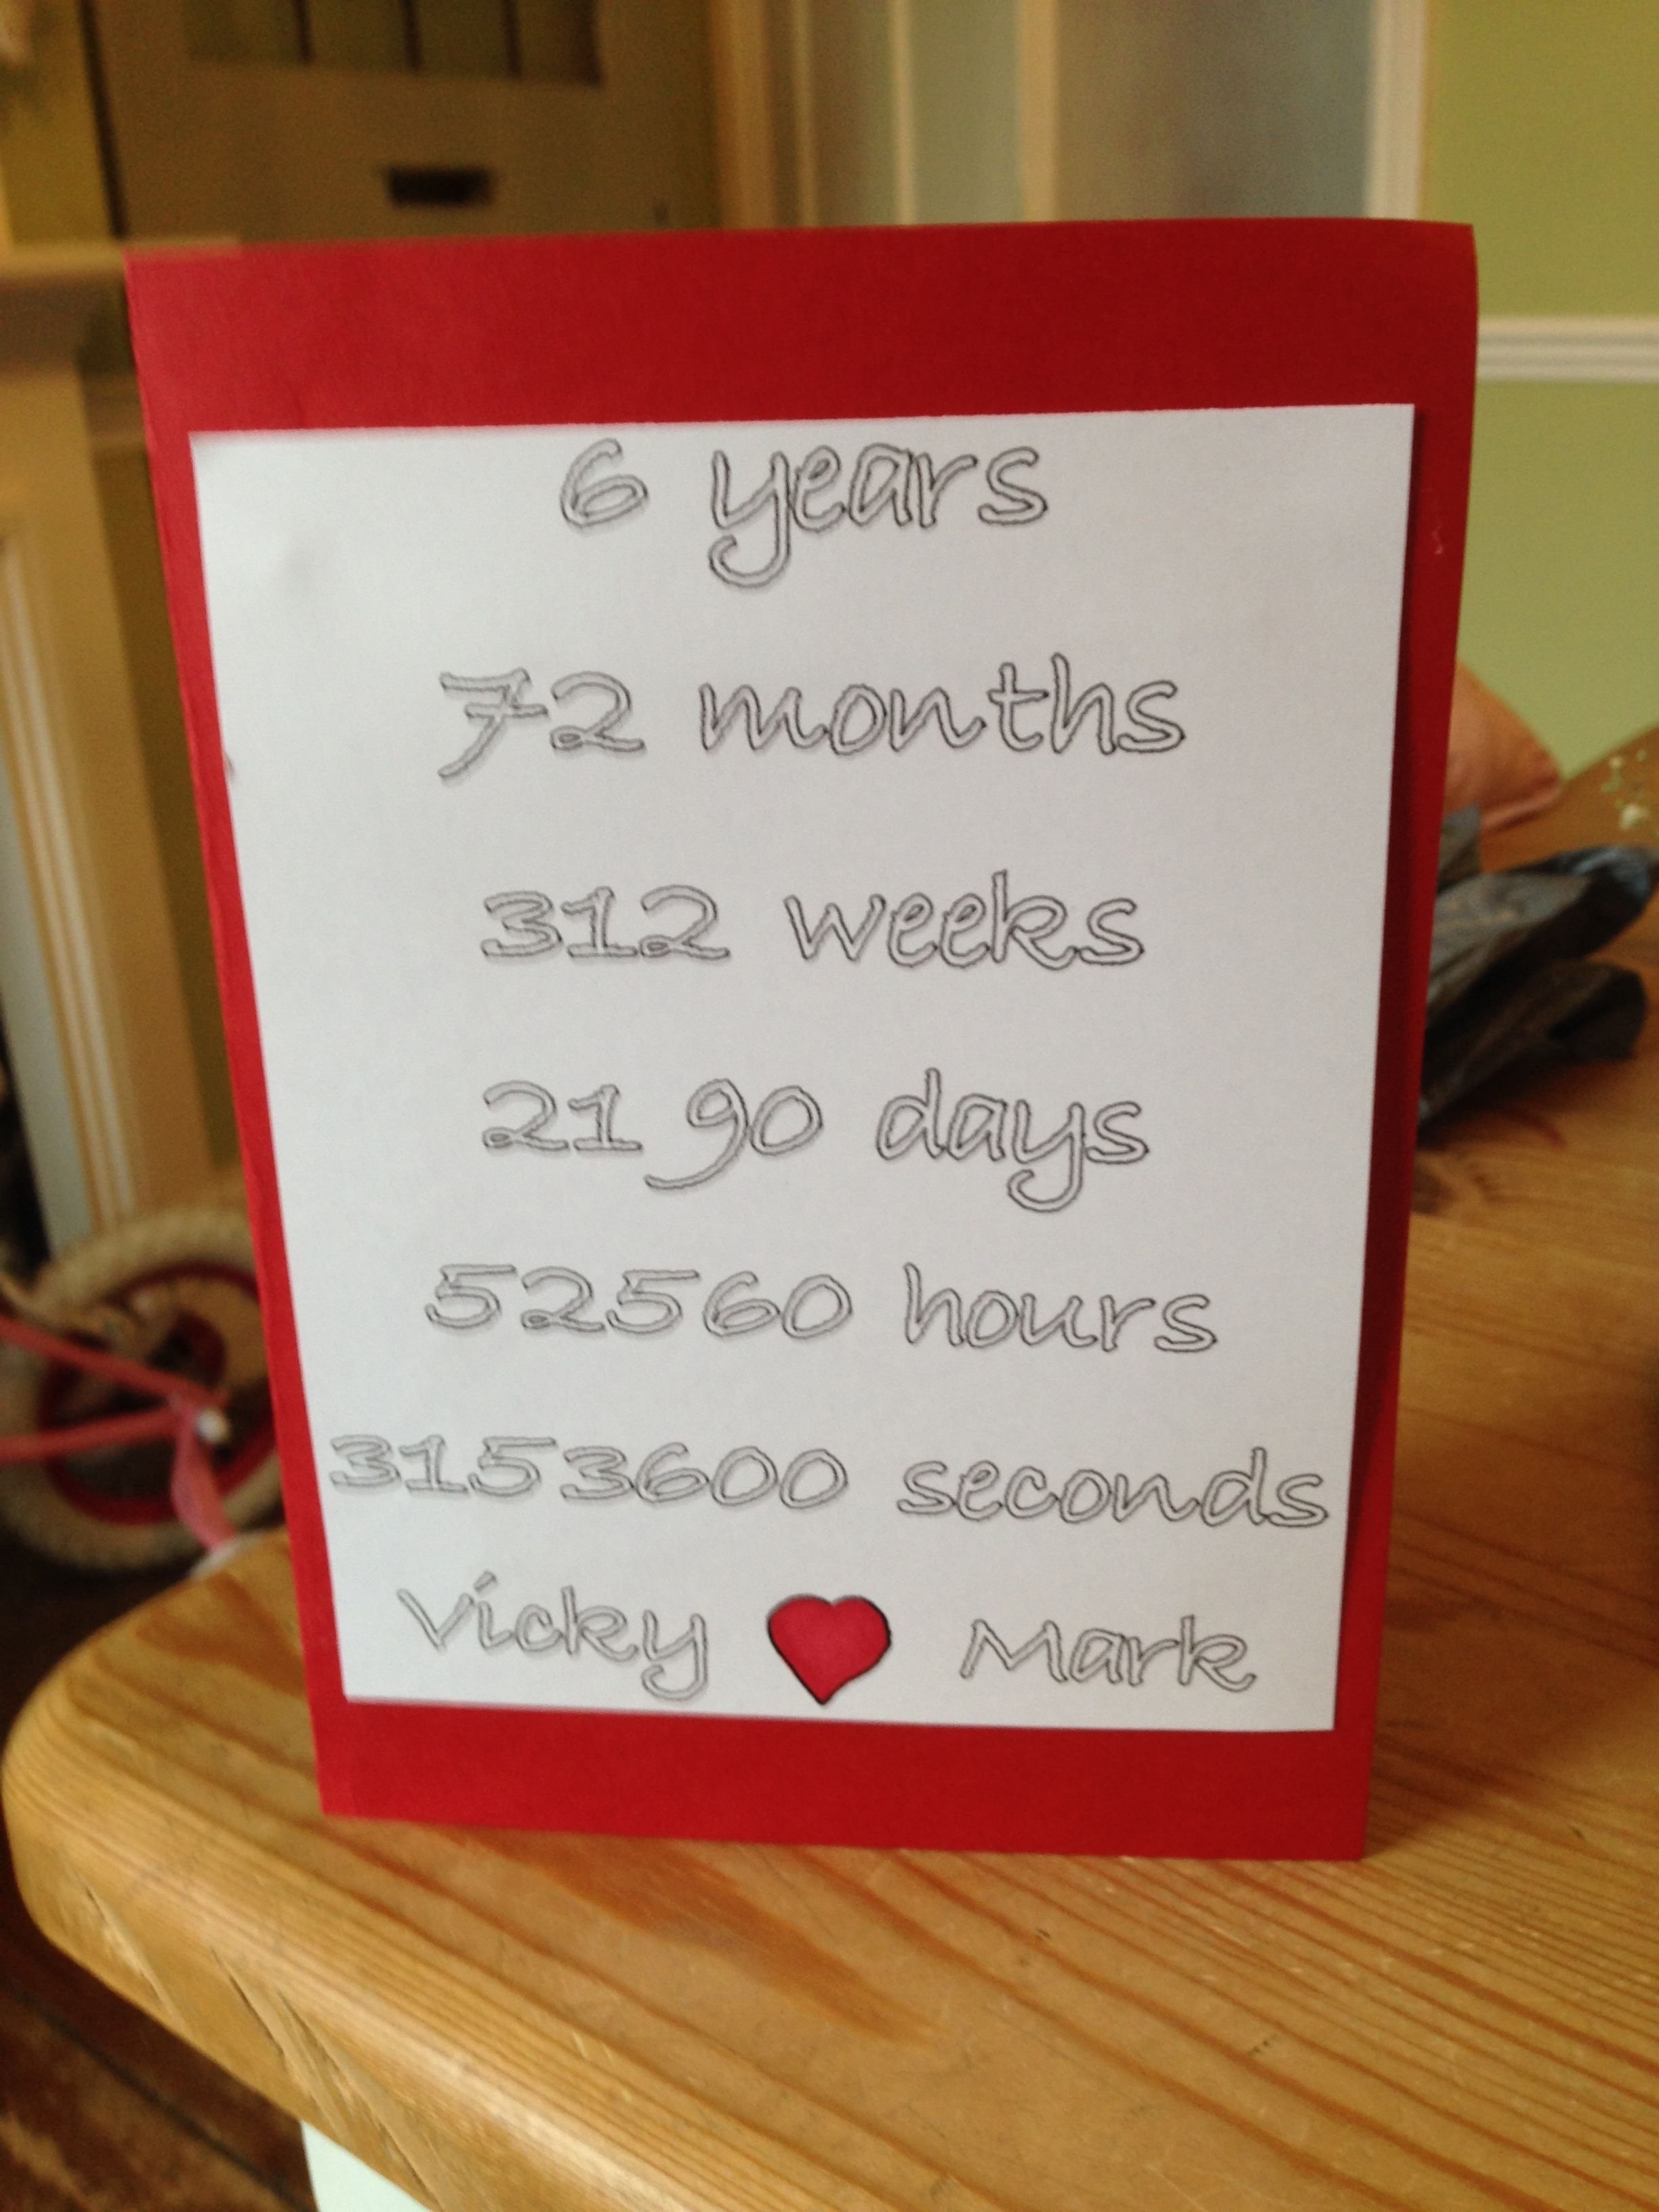 10 Lovely 6 Month Anniversary Date Ideas 6 year anniversary card love it pinterest anniversaries gift 3 2024